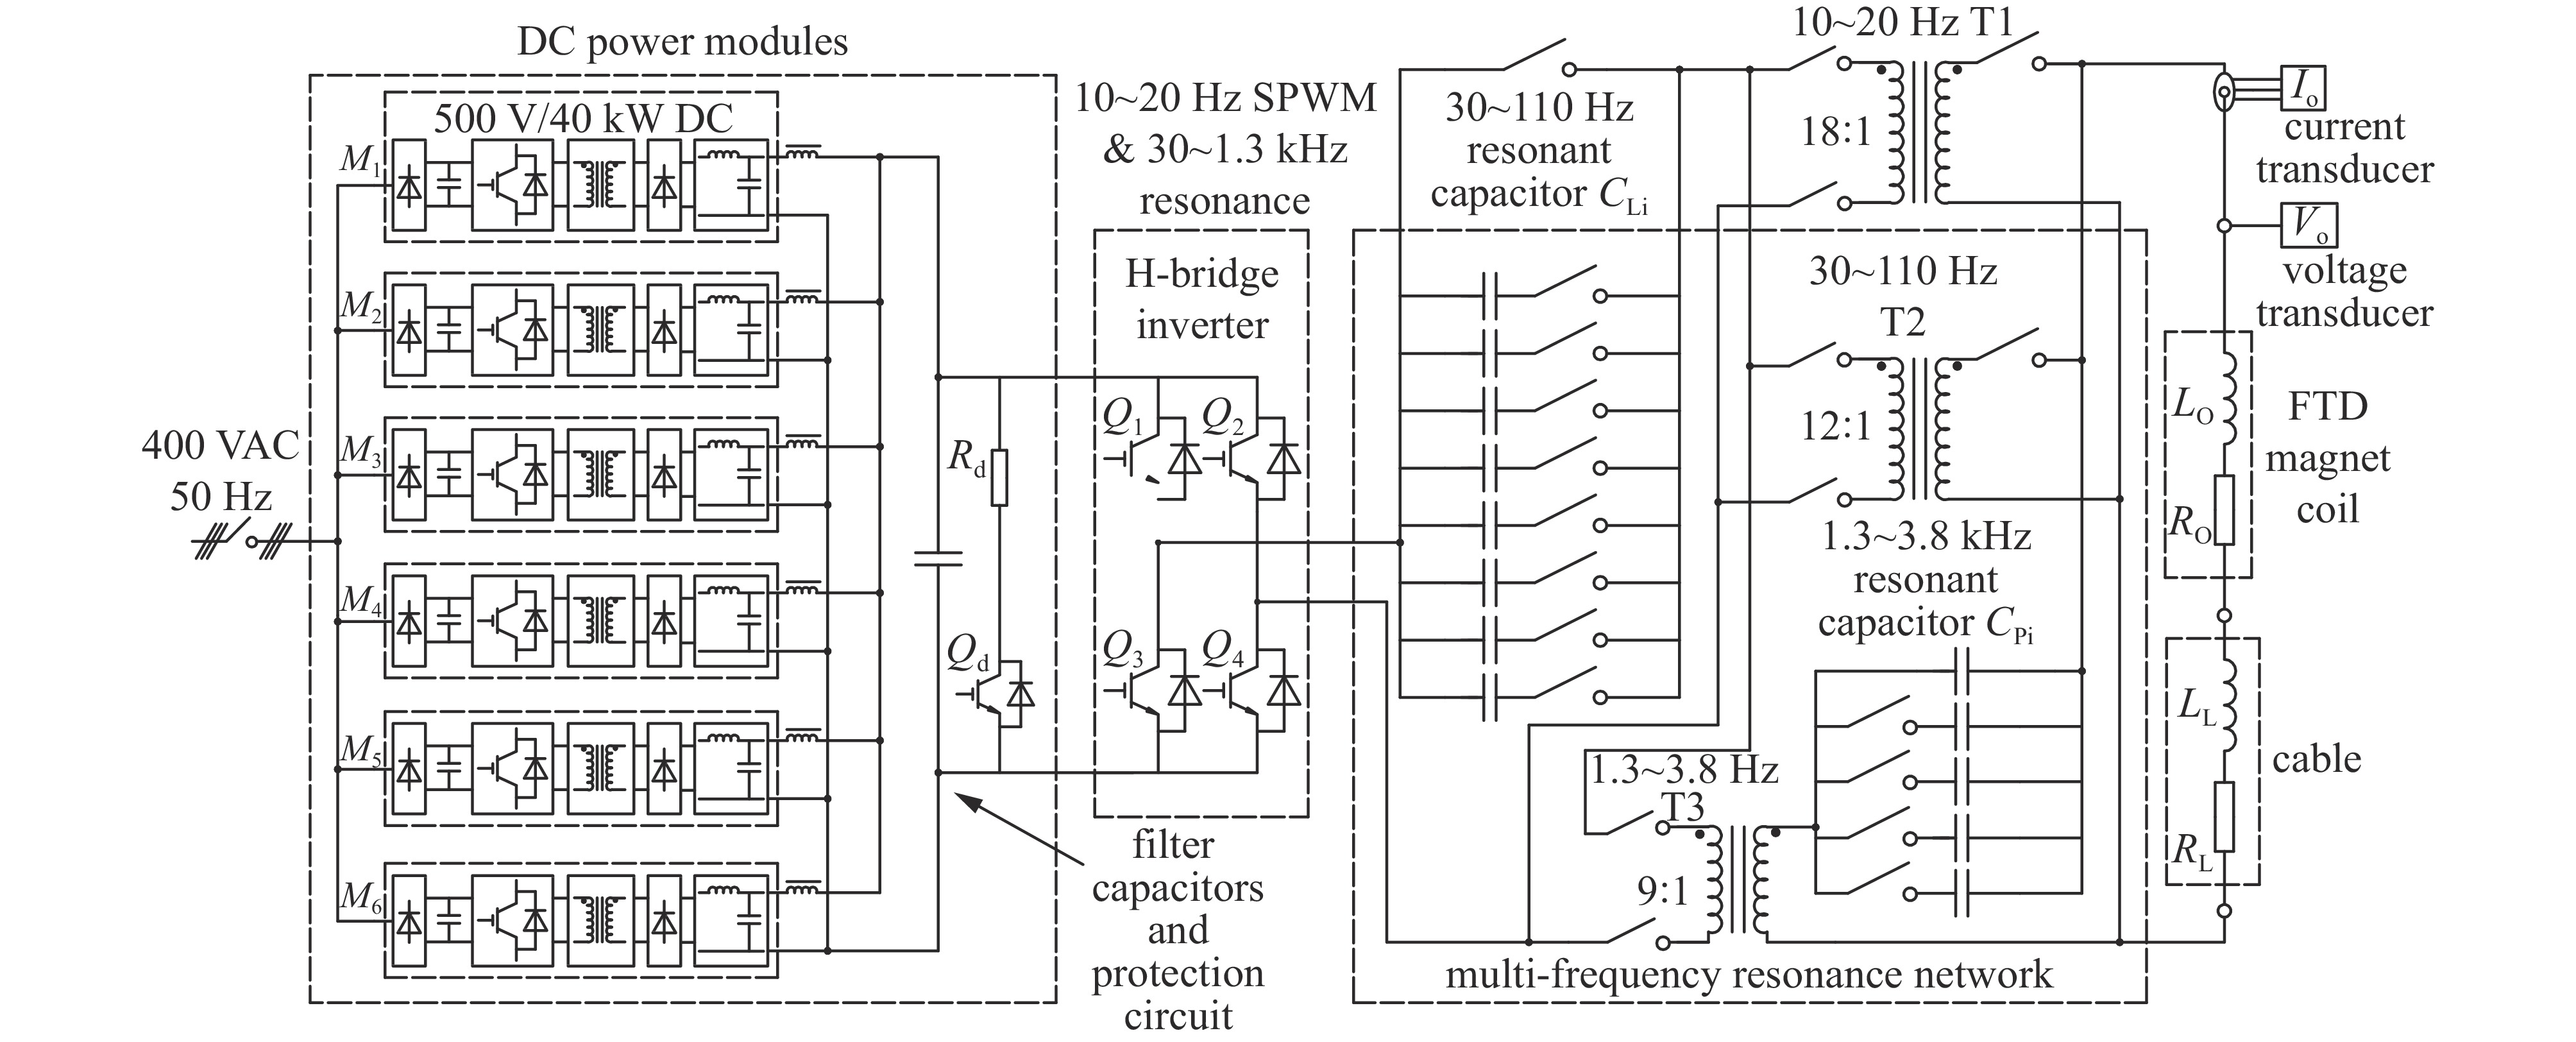 Circuit diagram of FTD magnet coil power supply (PS)